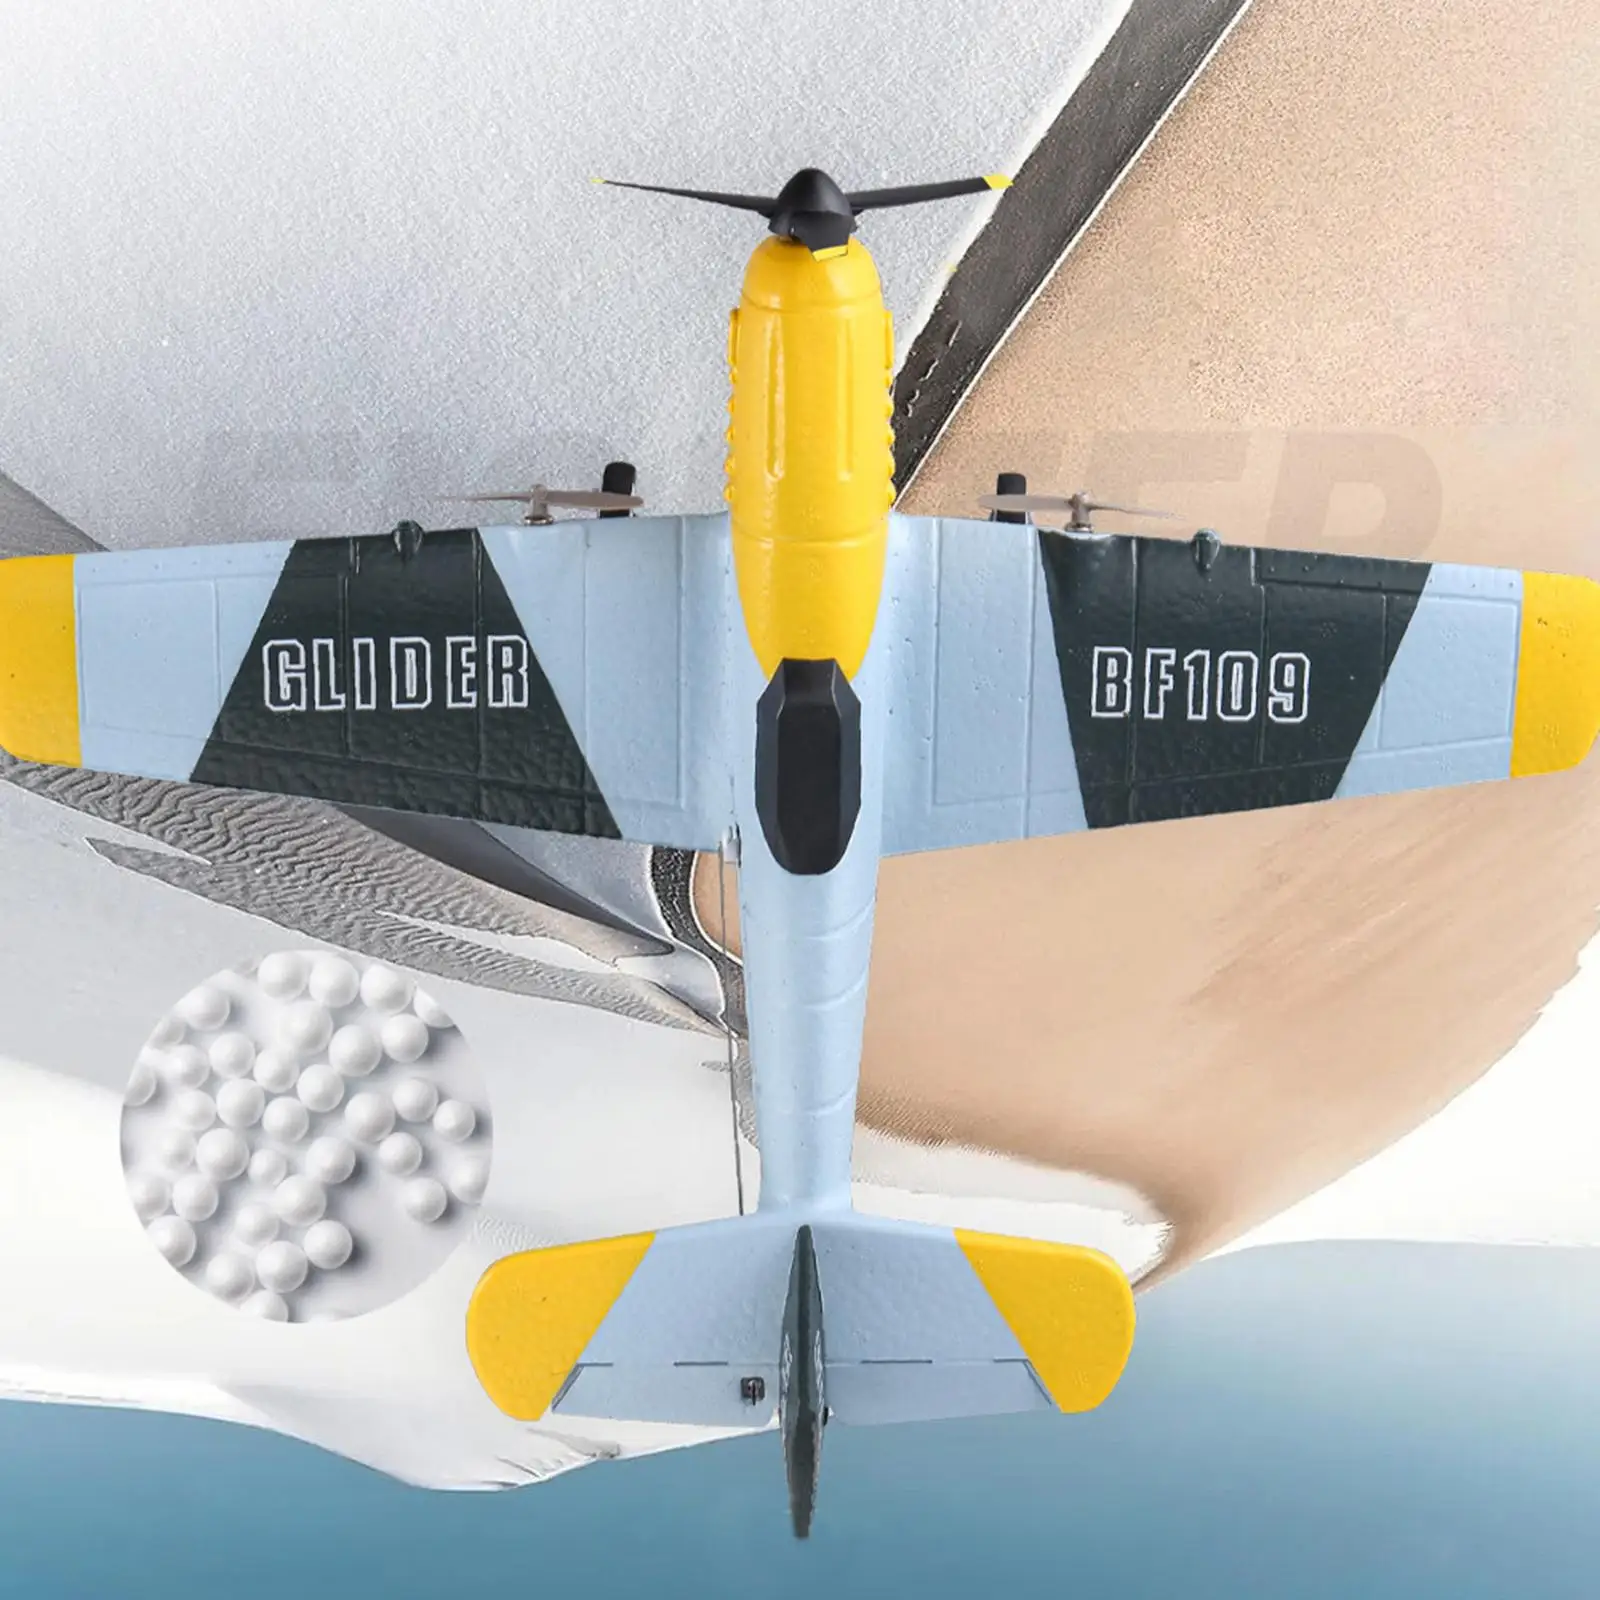 RC Plane Outdoor Flighting Toys Gift 3 Channel RC Glider Remote Control Airplane Easy to Control for Beginner Adults Boys Girls